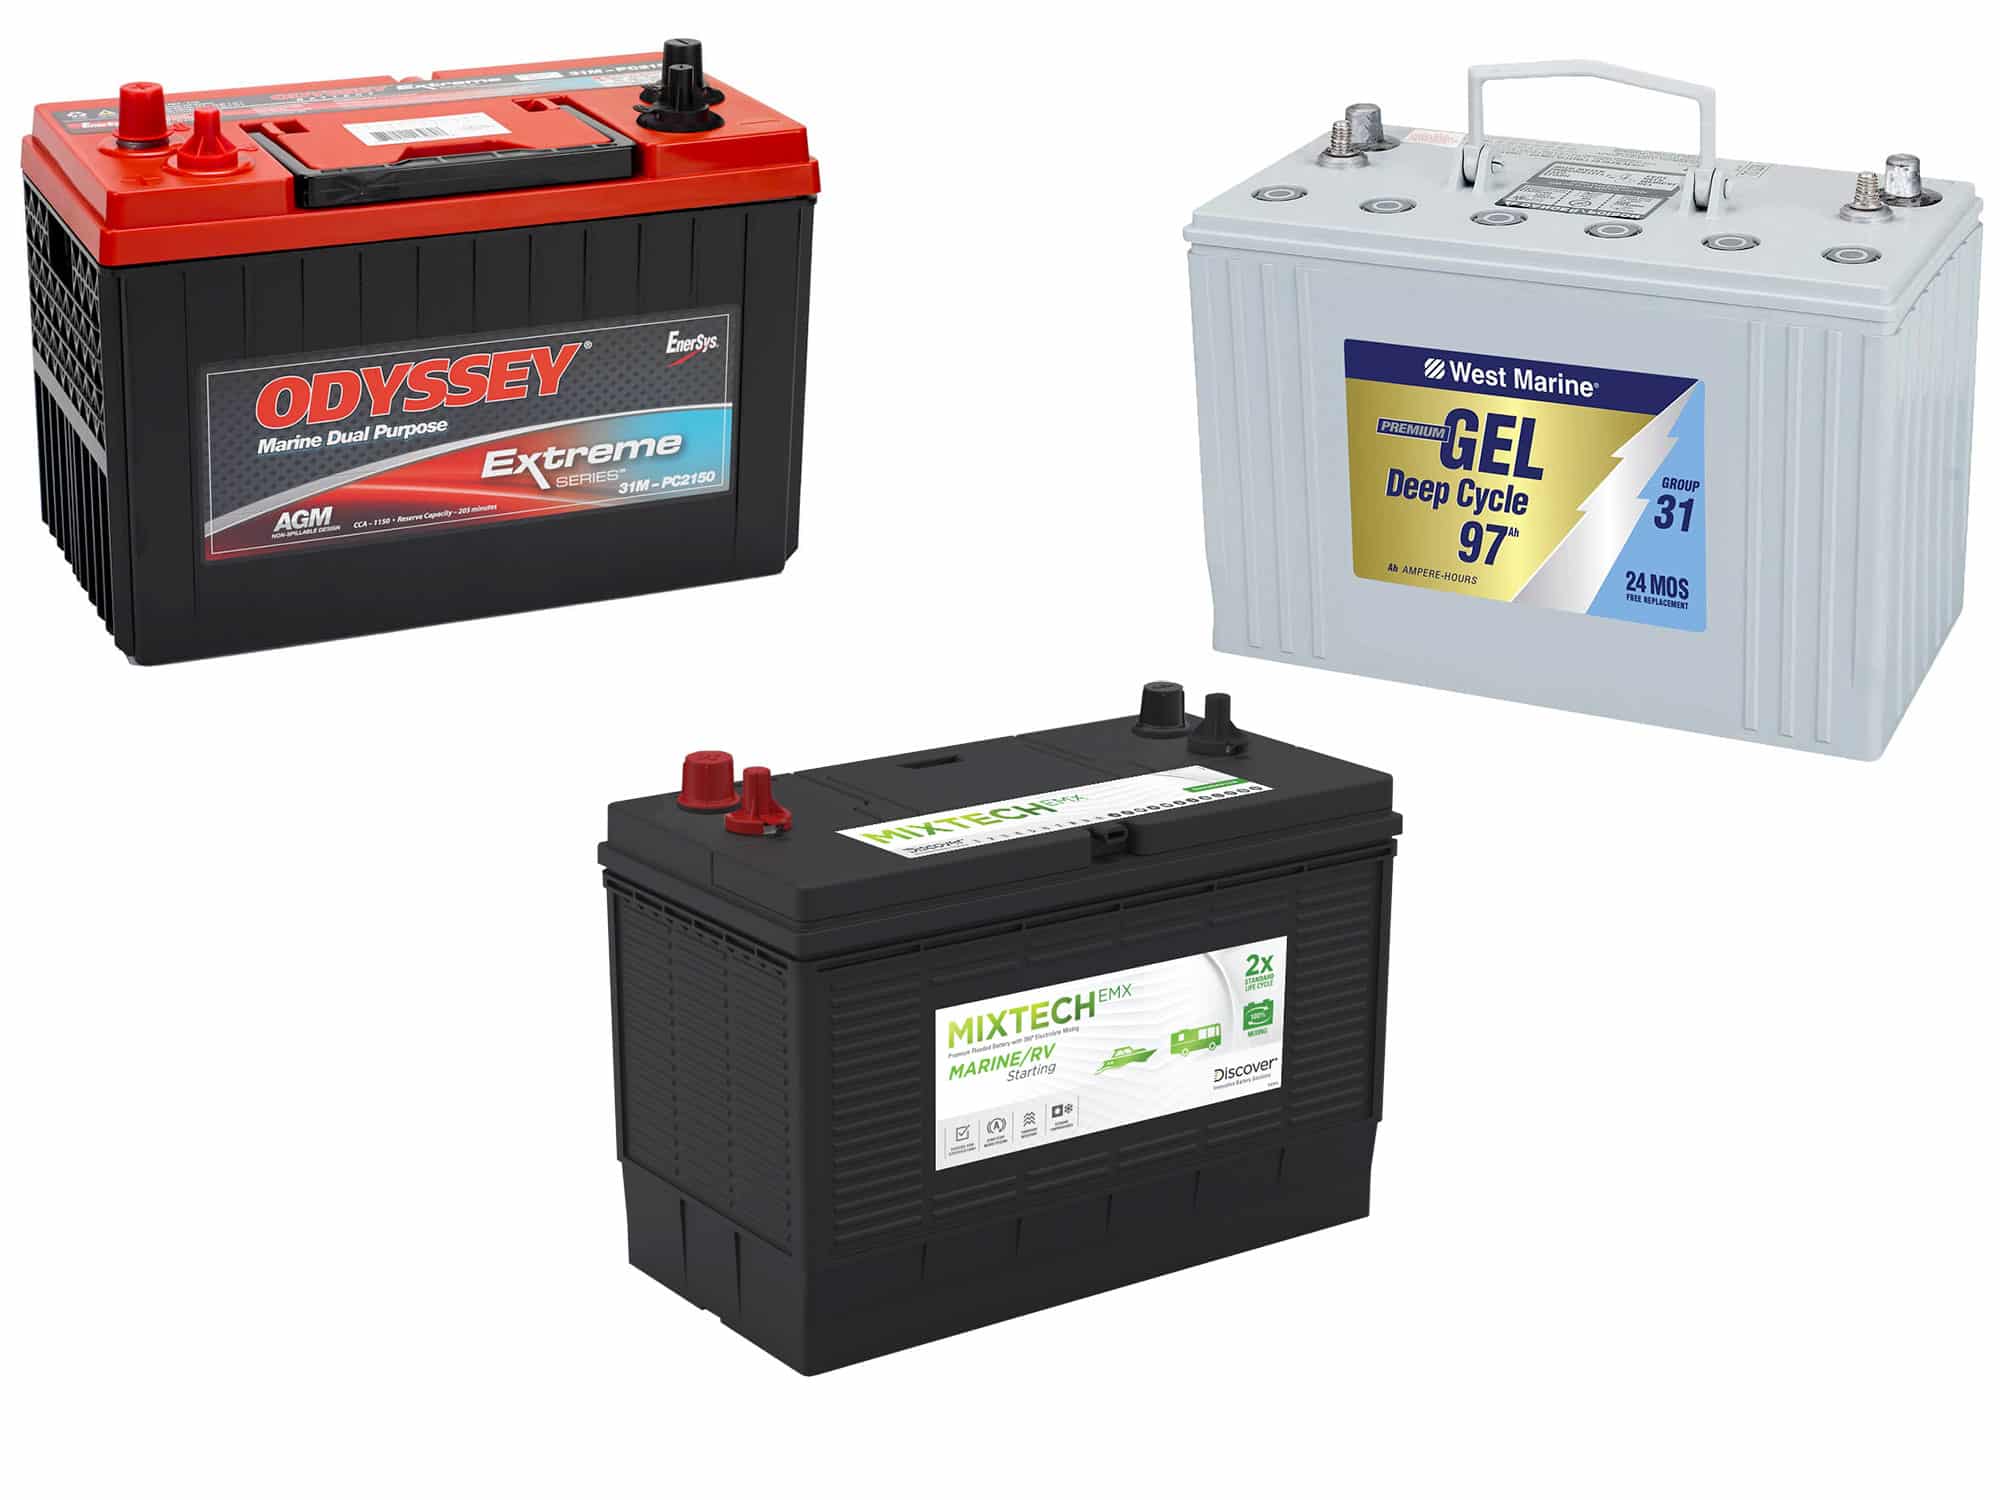 How to Pick the Right Marine Lead-Acid Battery